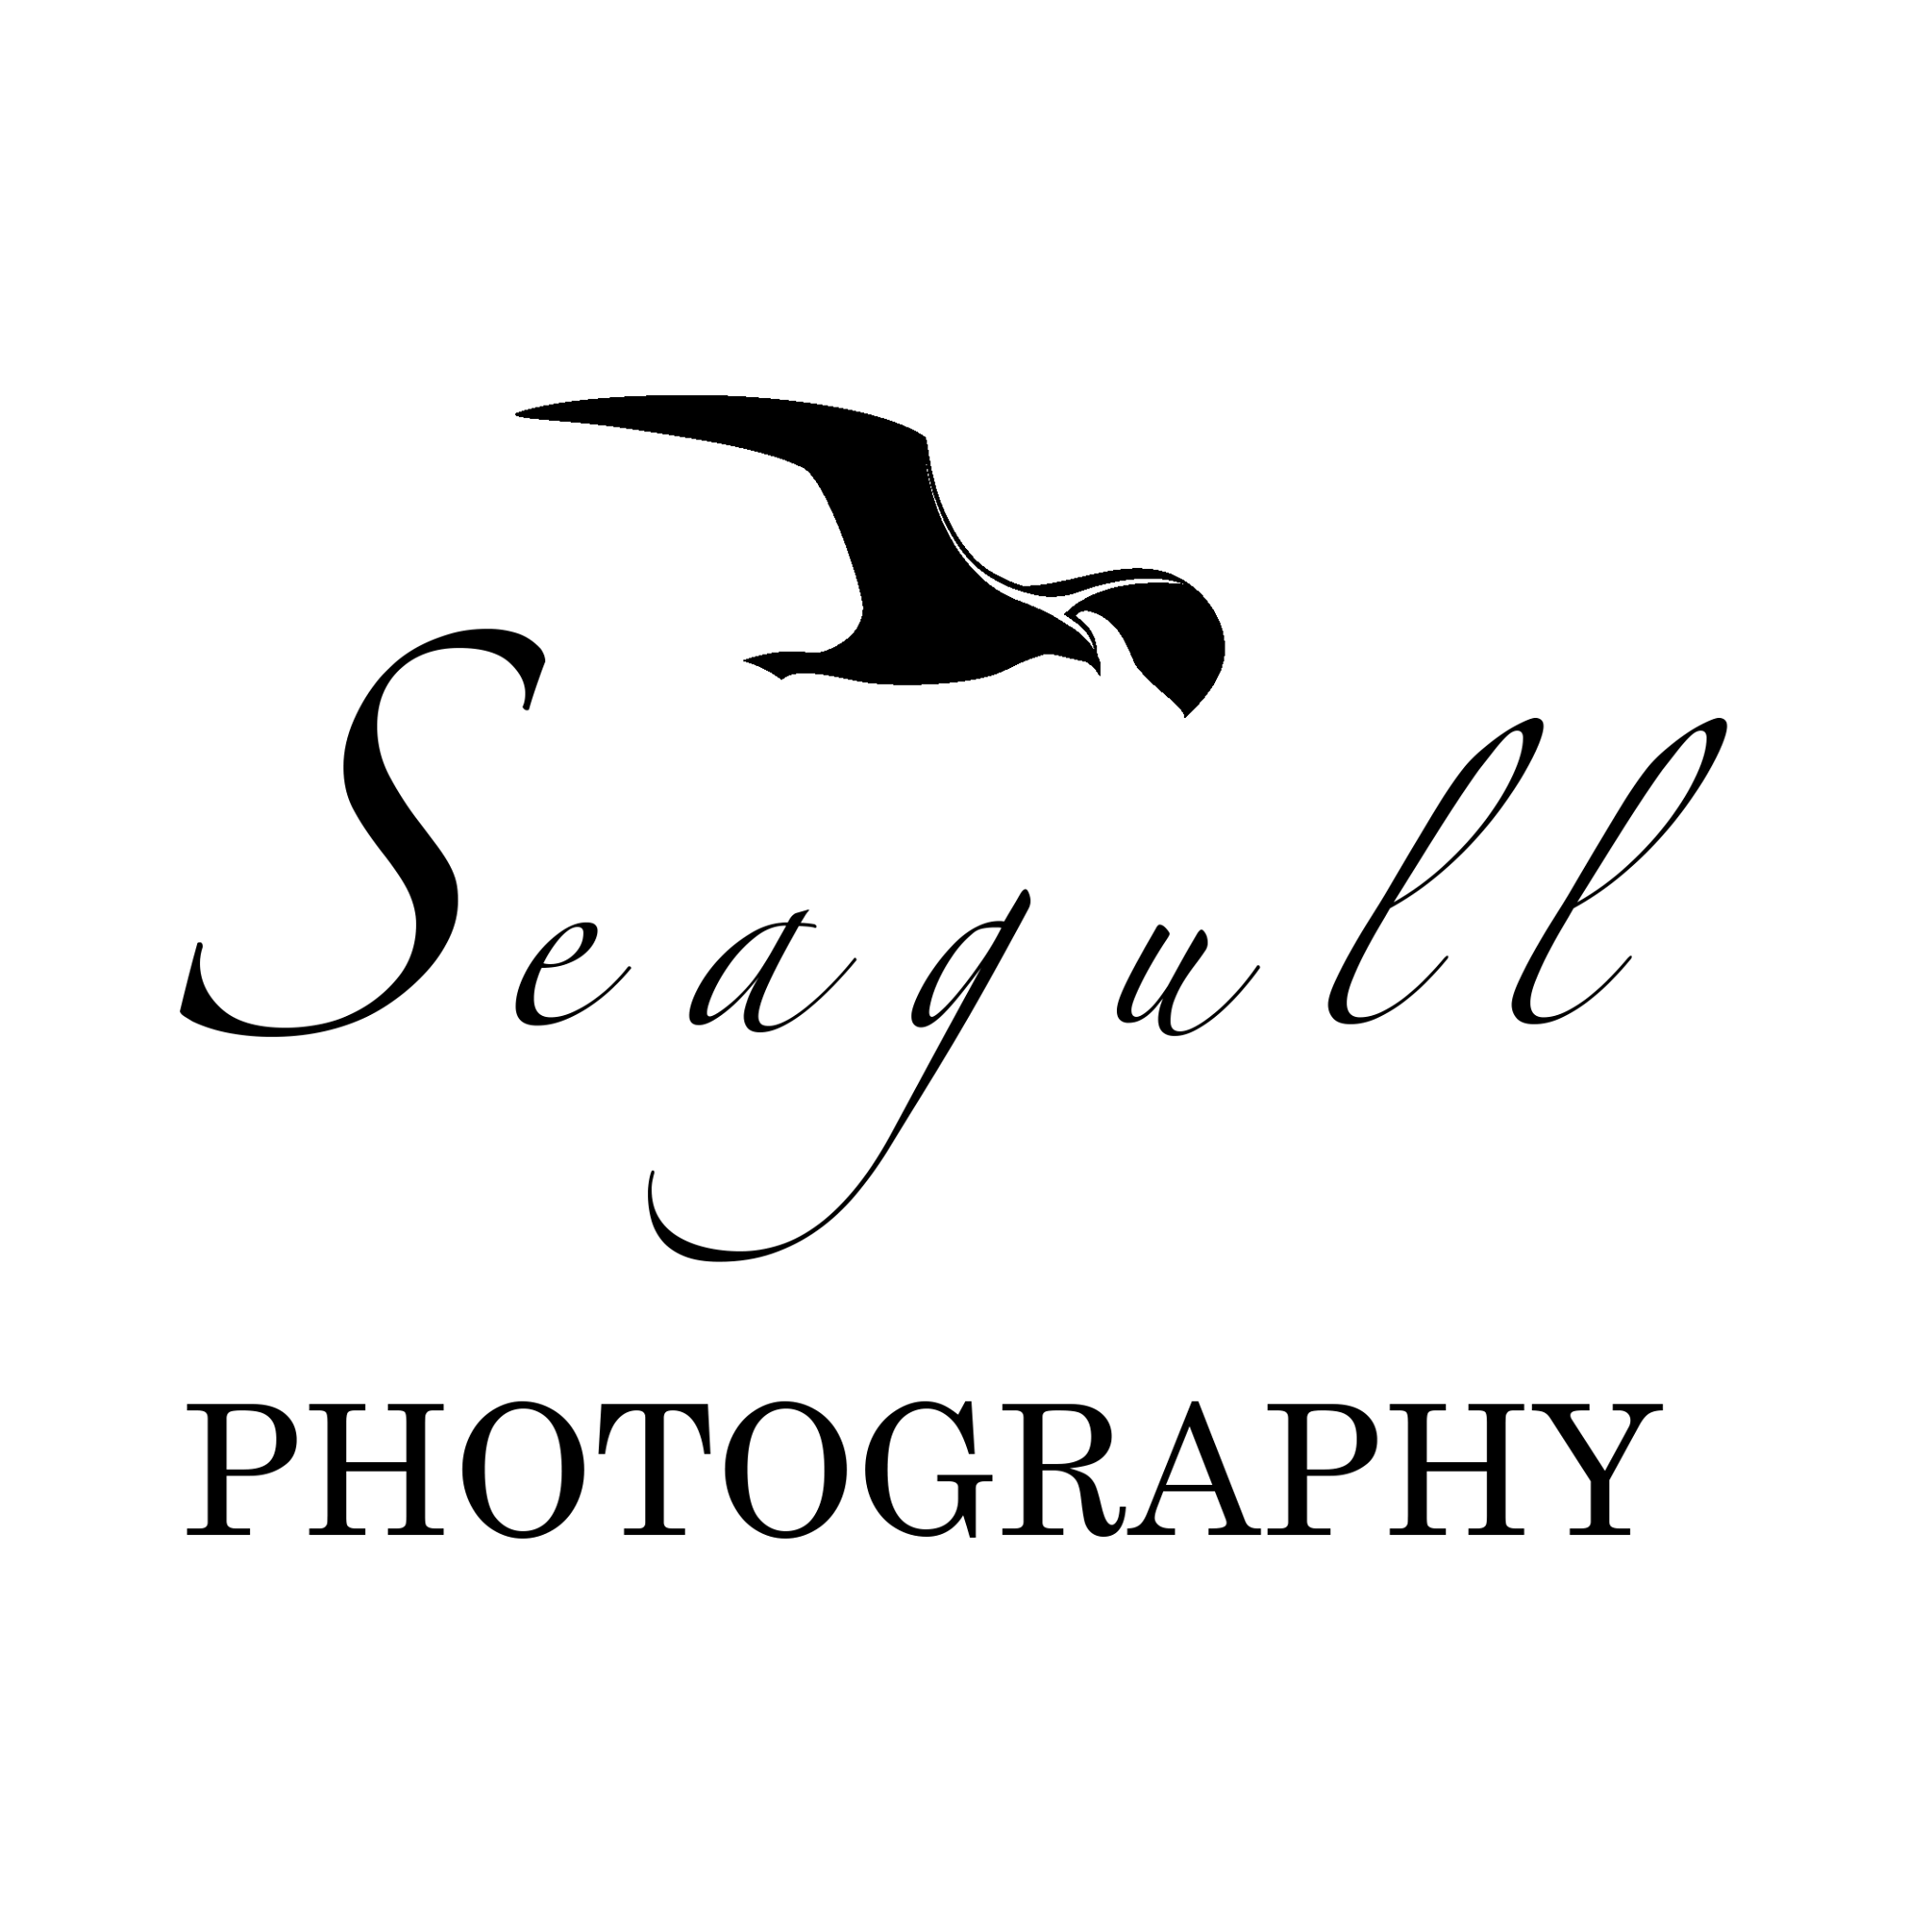 Seagull Photography